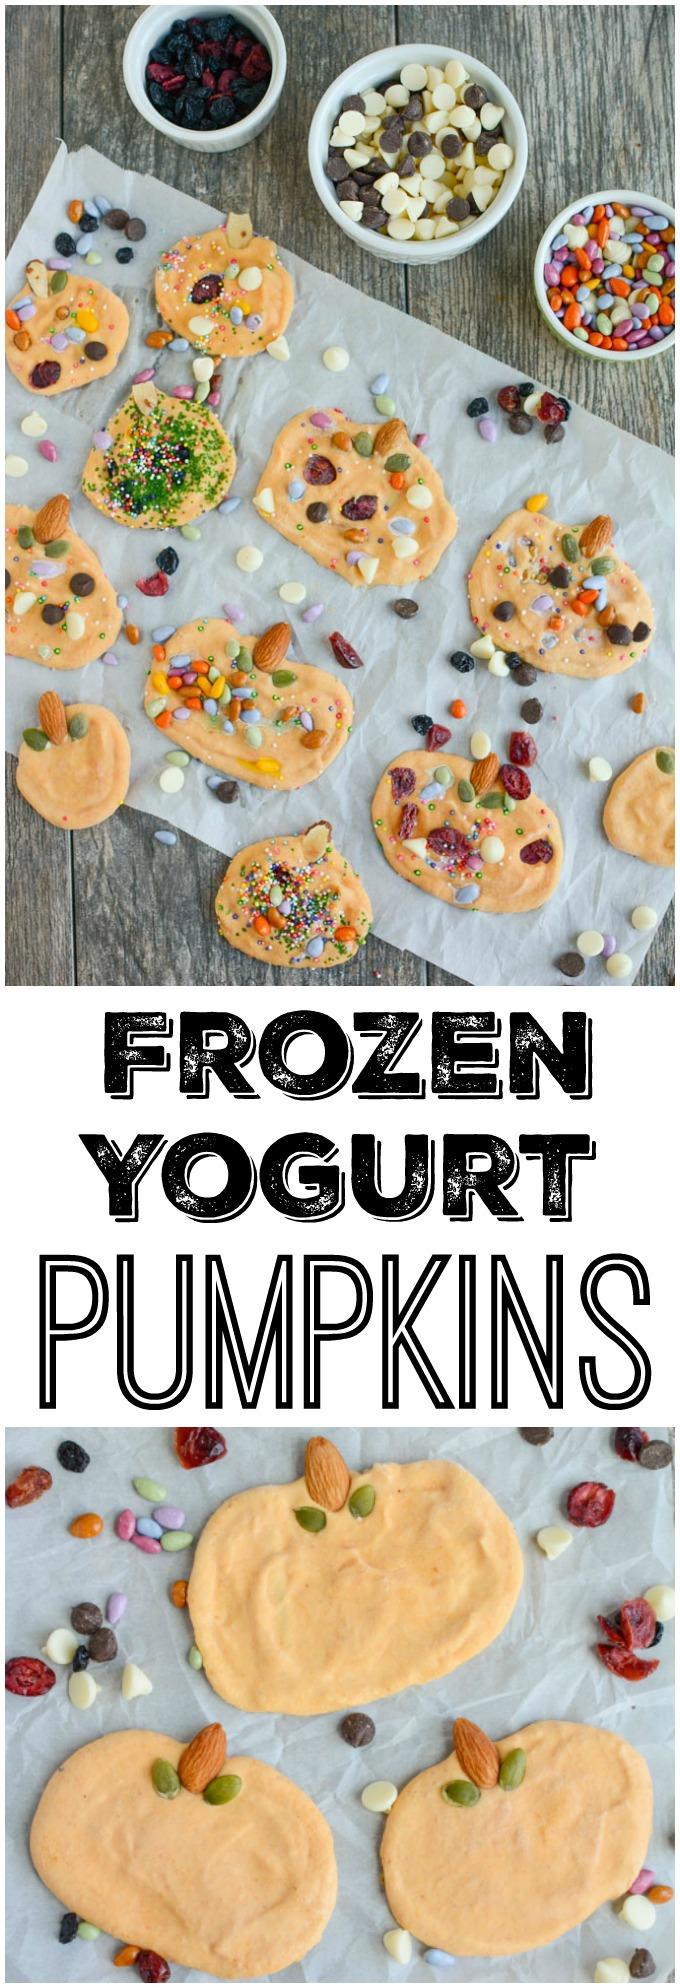 These Frozen Yogurt Pumpkins are a healthy, kid-friendly Halloween treat! They're easy to make and fun to decorate, perfect for a play date or party!